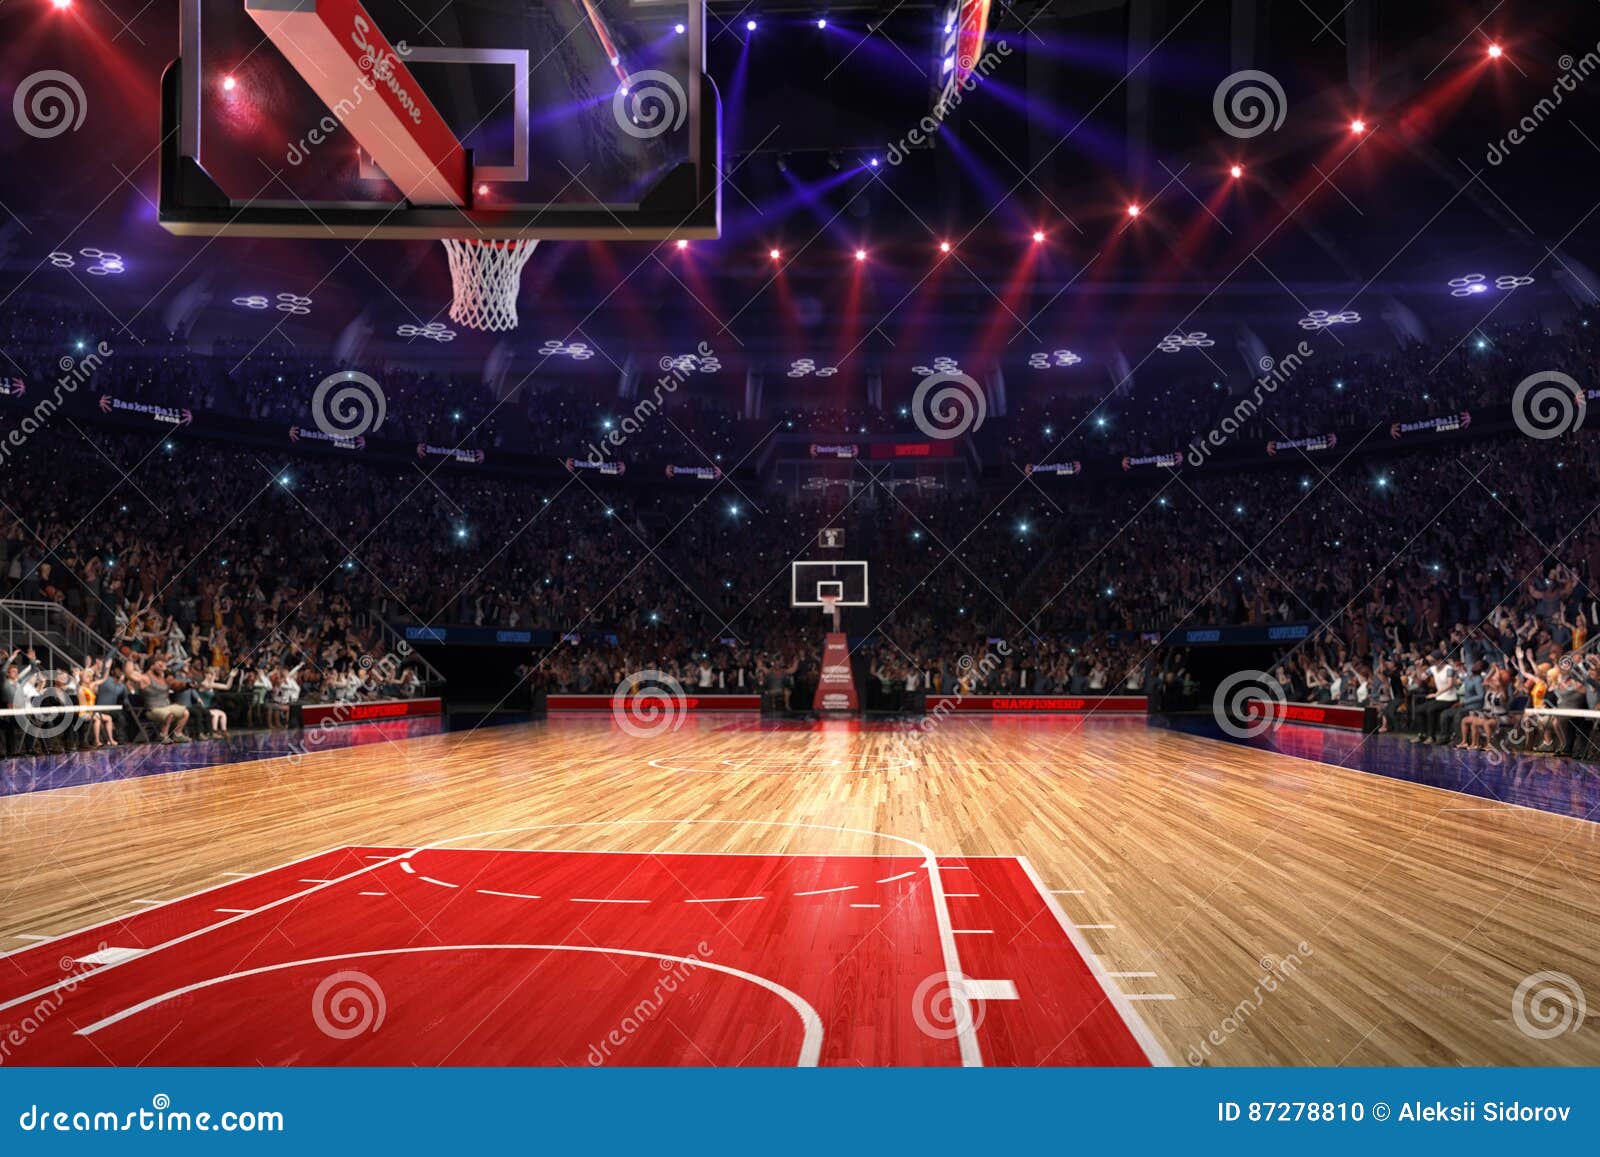 basketball court with people fan. sport arena.photoreal 3d render background. blured in long shot distancelike leans optical